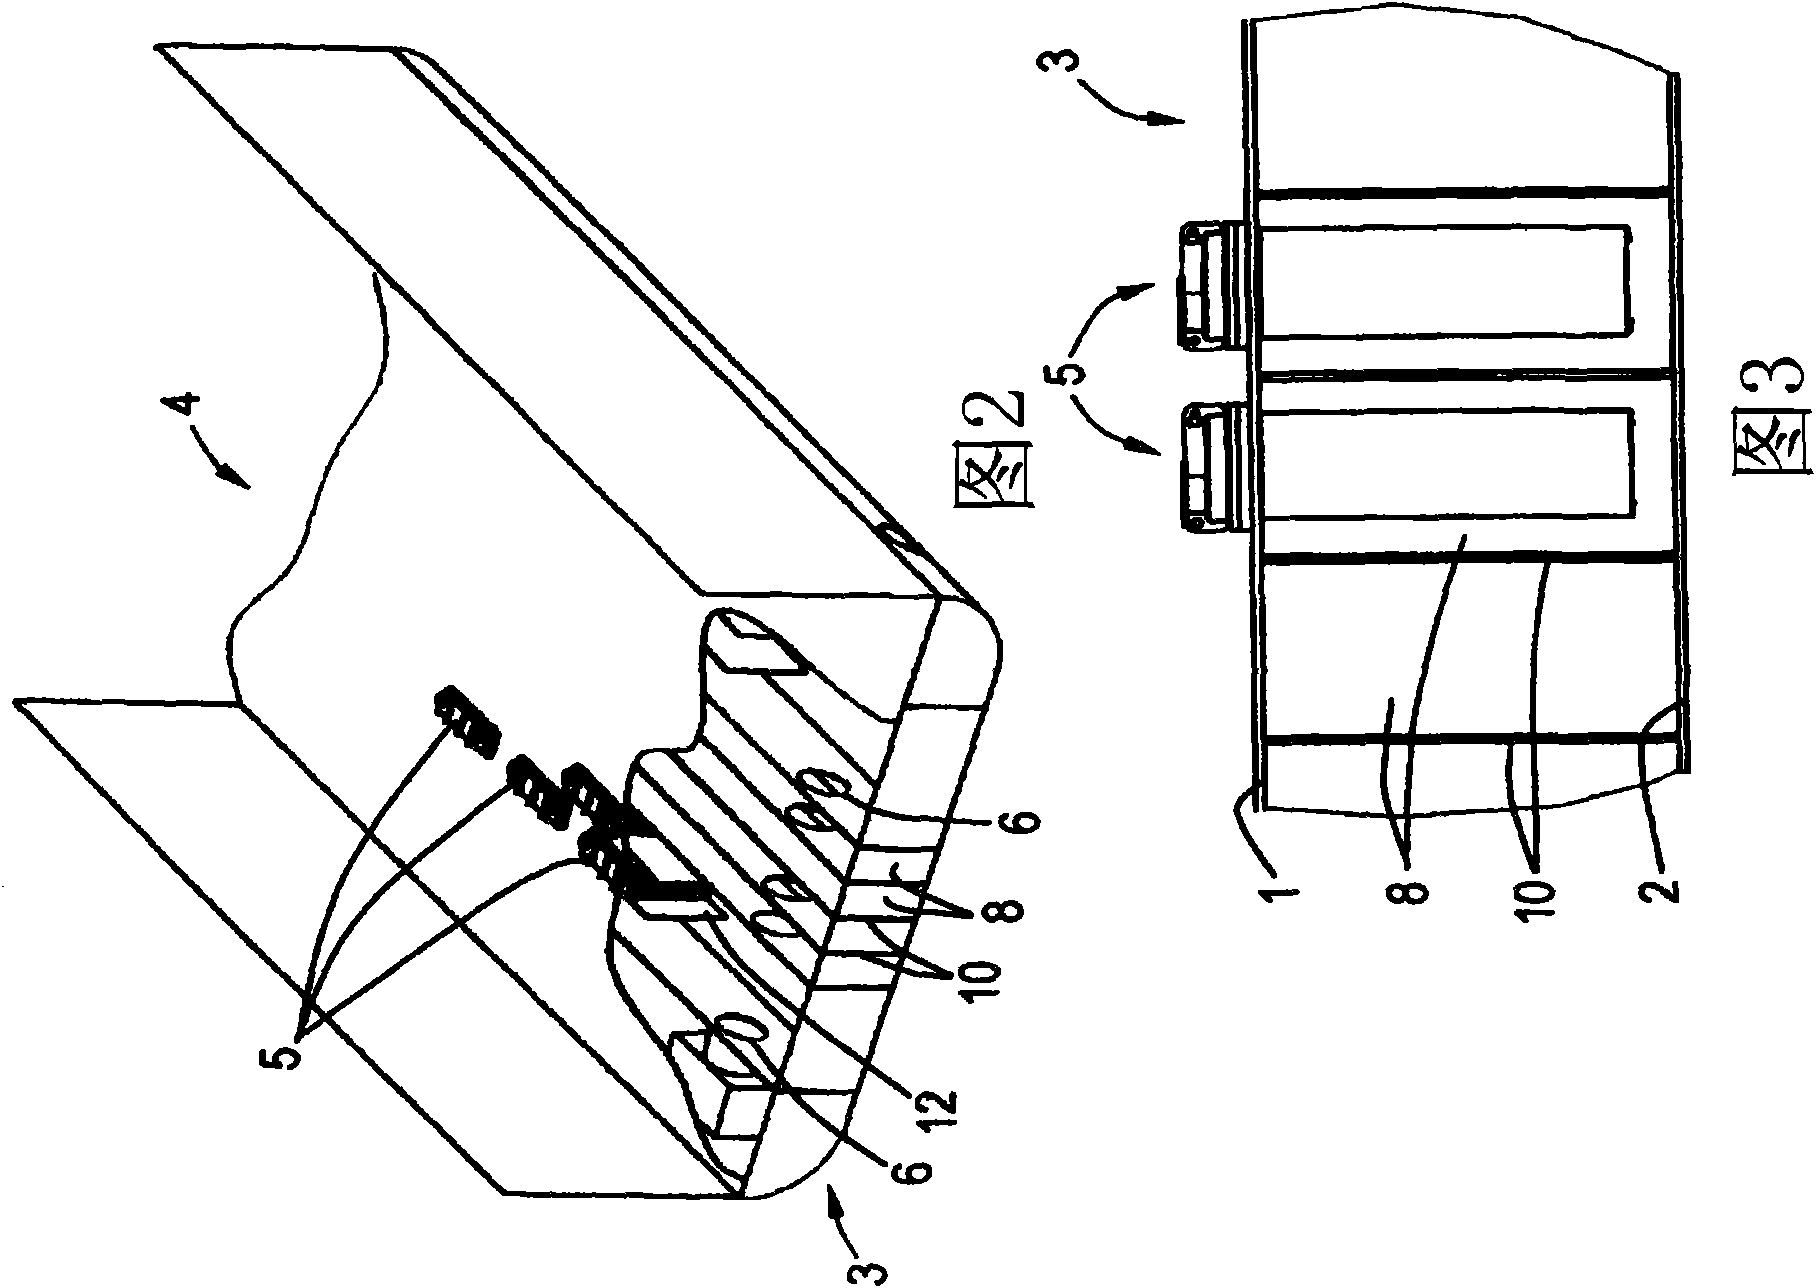 Vessel provided with heat exchangers in the double bottom thereof